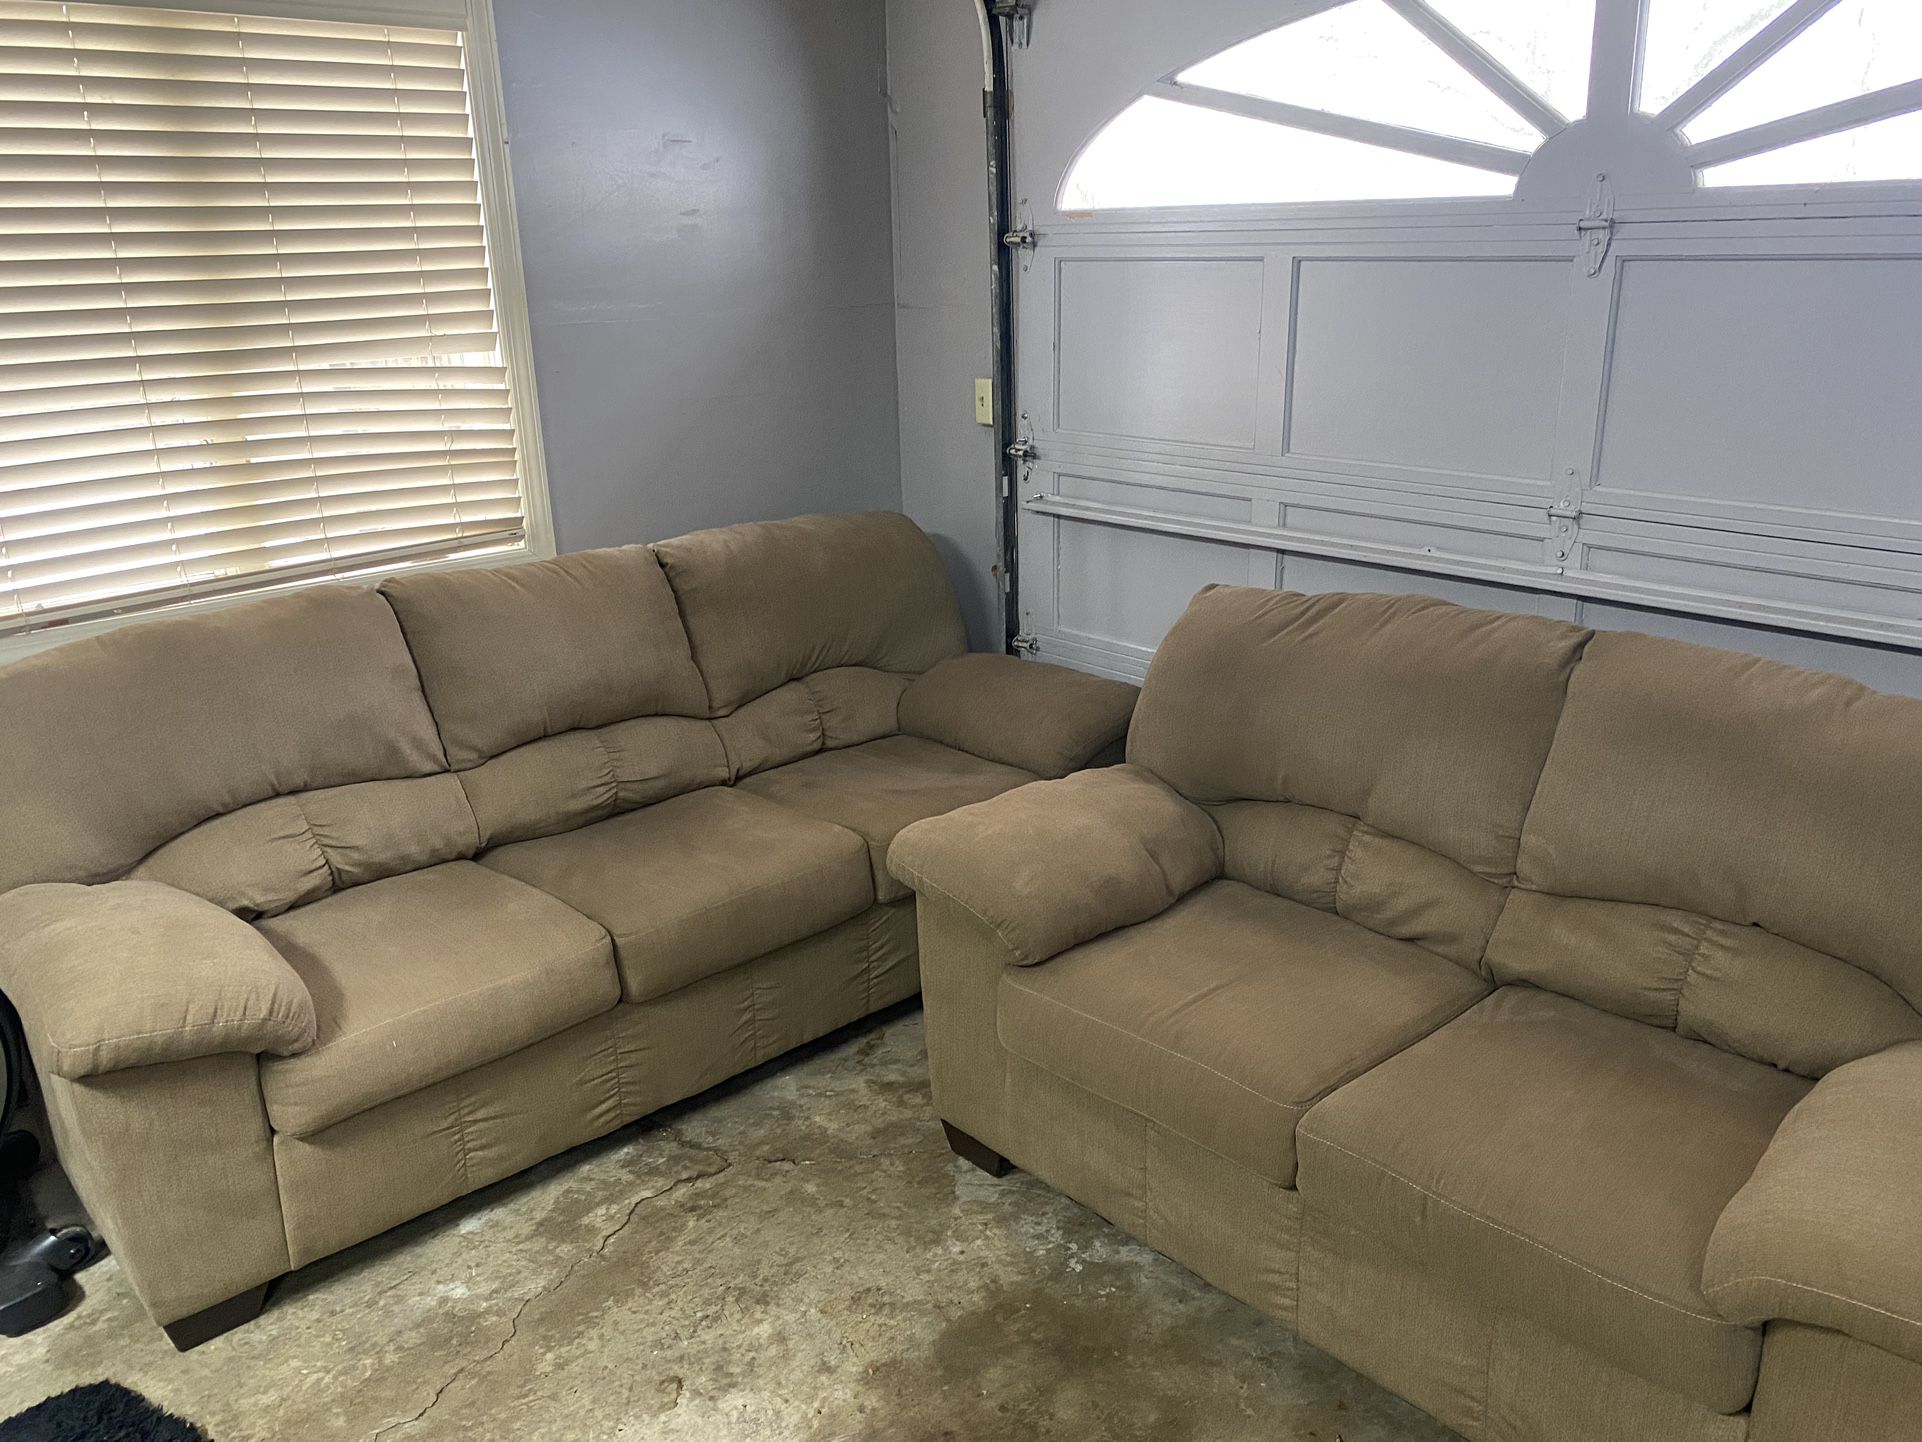 Couch Love Seat Combo